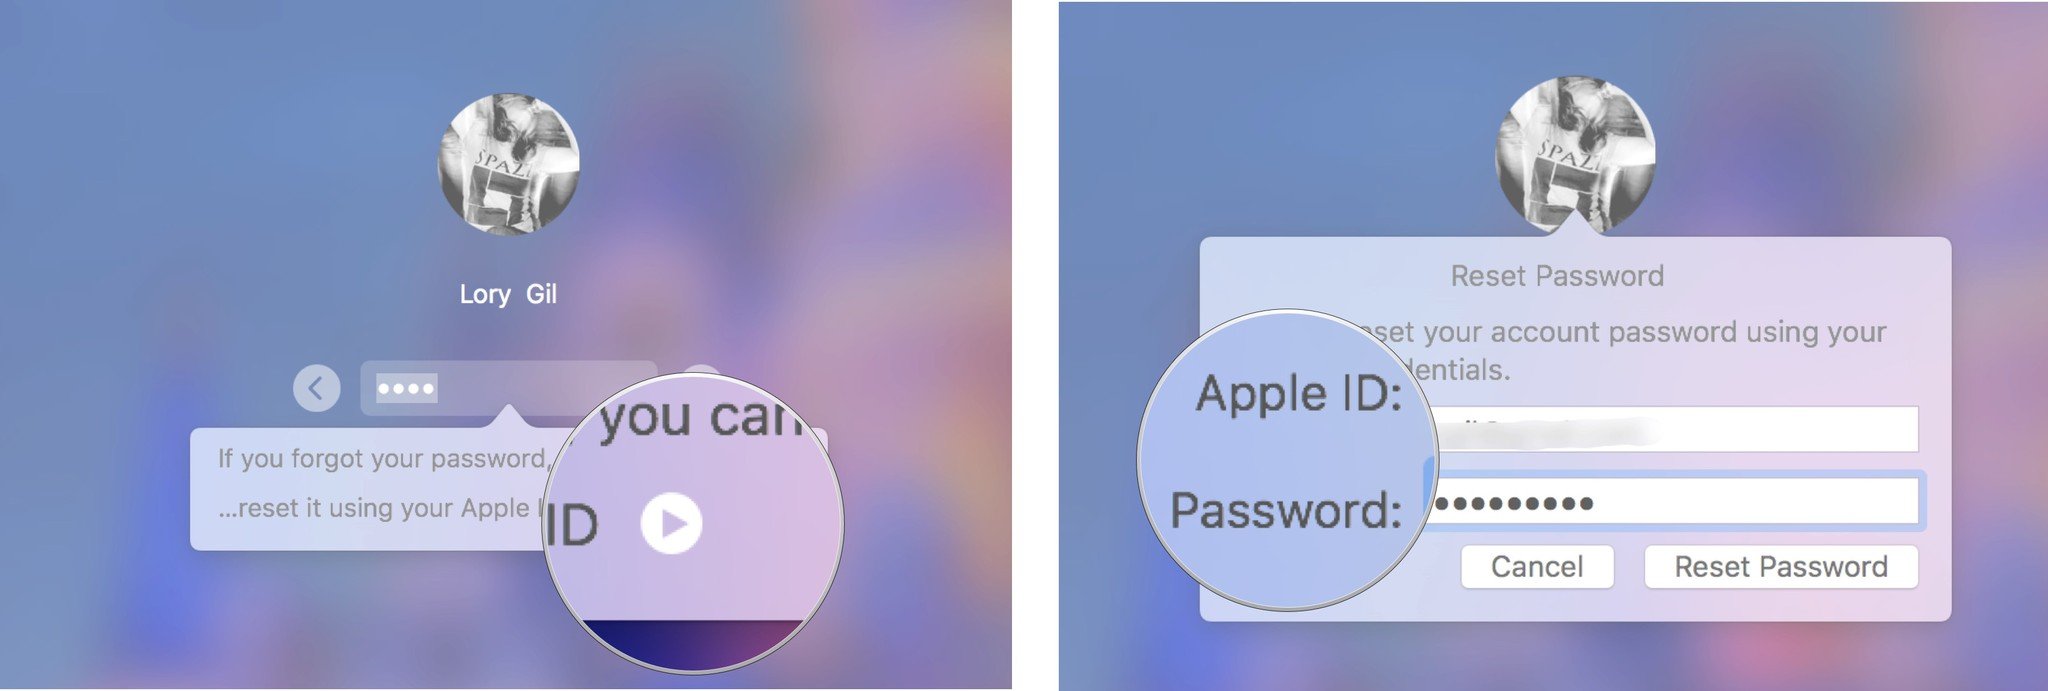 Click the arrow, then enter your Apple ID and password